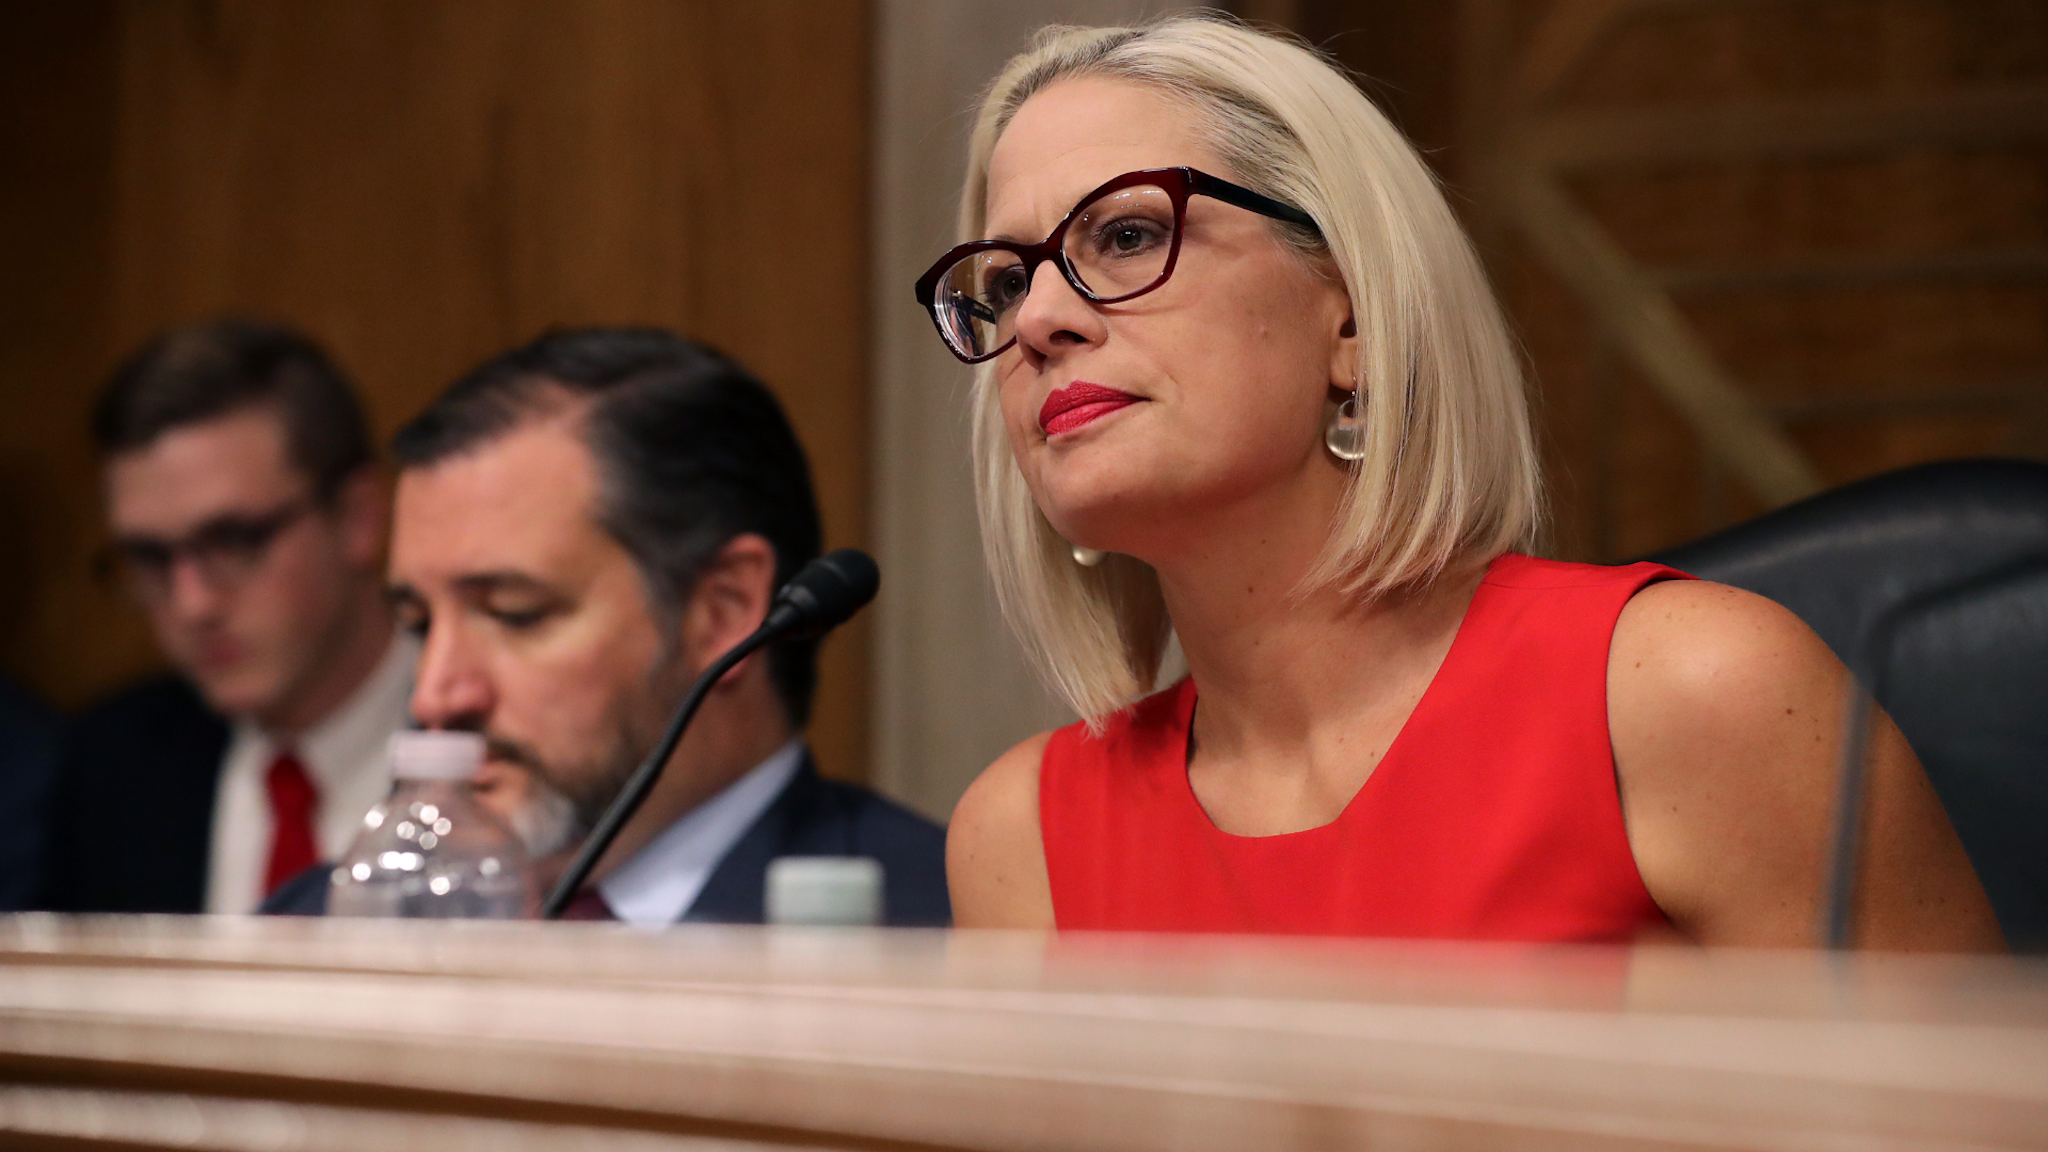 Senate Aviation and Space Subcommittee ranking member Sen. Kyrsten Sinema questions witnesses during a hearing in the Dirksen Senate Office Building on Capitol Hill on May 14, 2019 in Washington, DC. In the wake of President Donald Trump's orders to create a military Space Force, NASA Administrator Jim Bridenstine testified about "The Emerging Space Environment: Operational, Technical, and Policy Challenges."